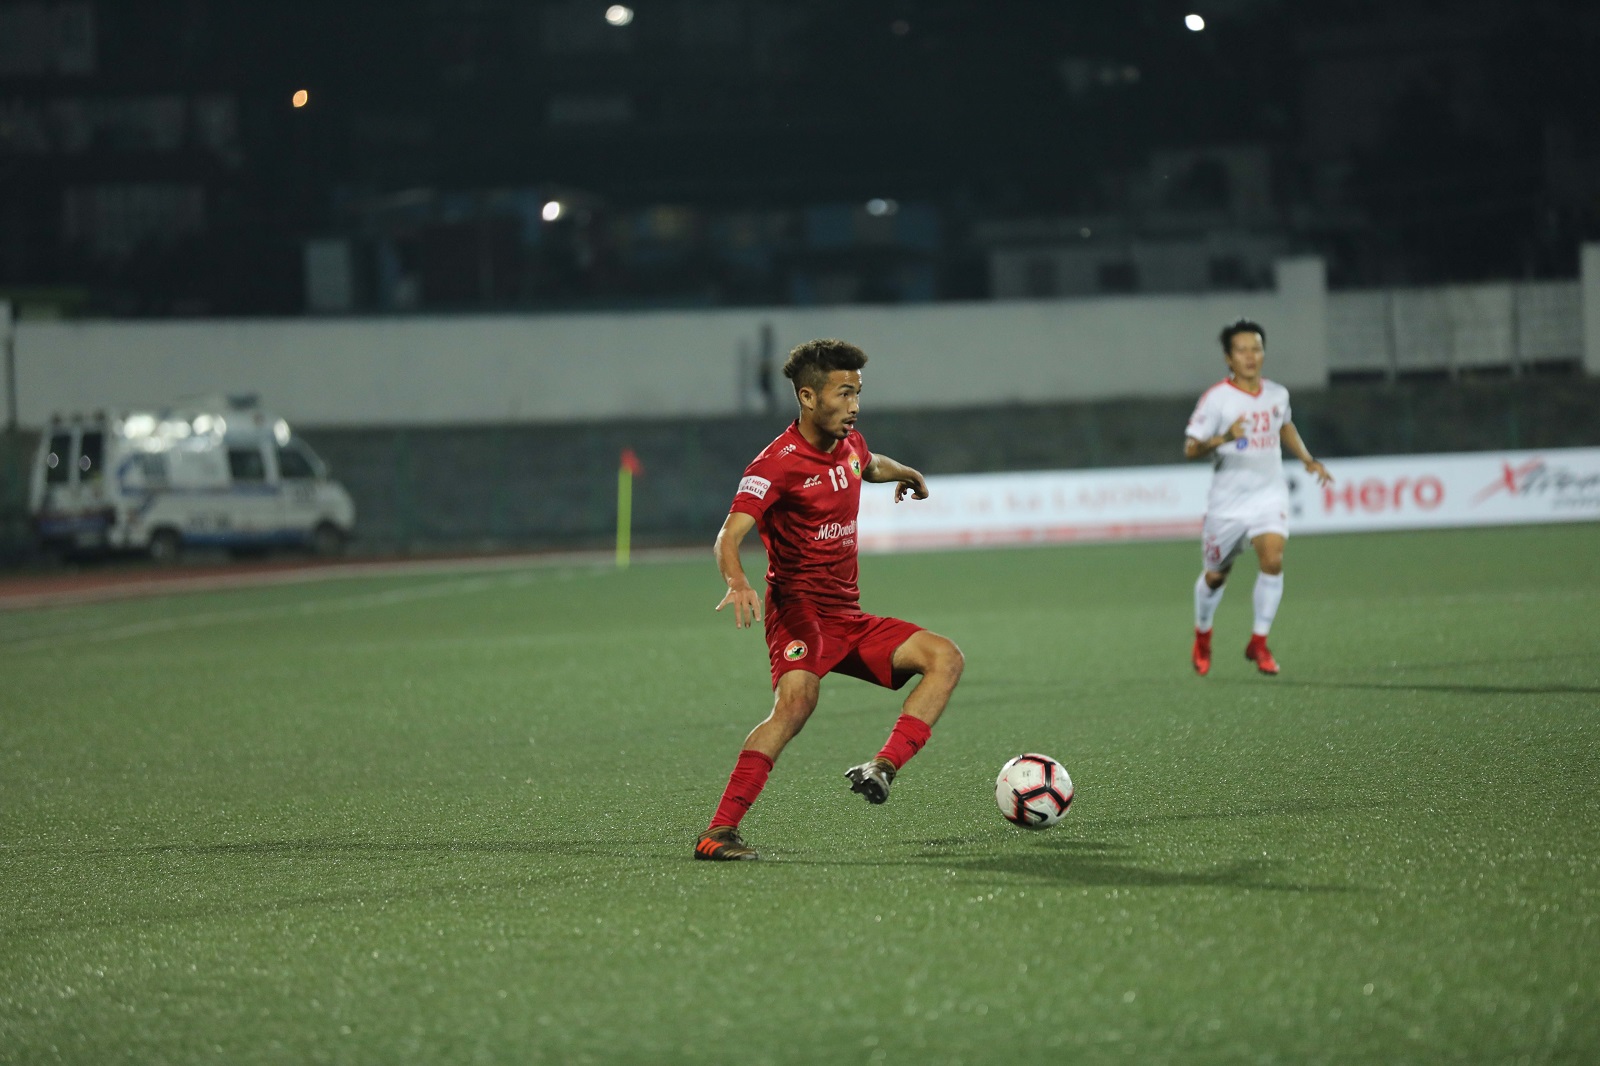 Naorem Mahesh announced his arrival in the Indian football scene with a brace against Aizawl FC